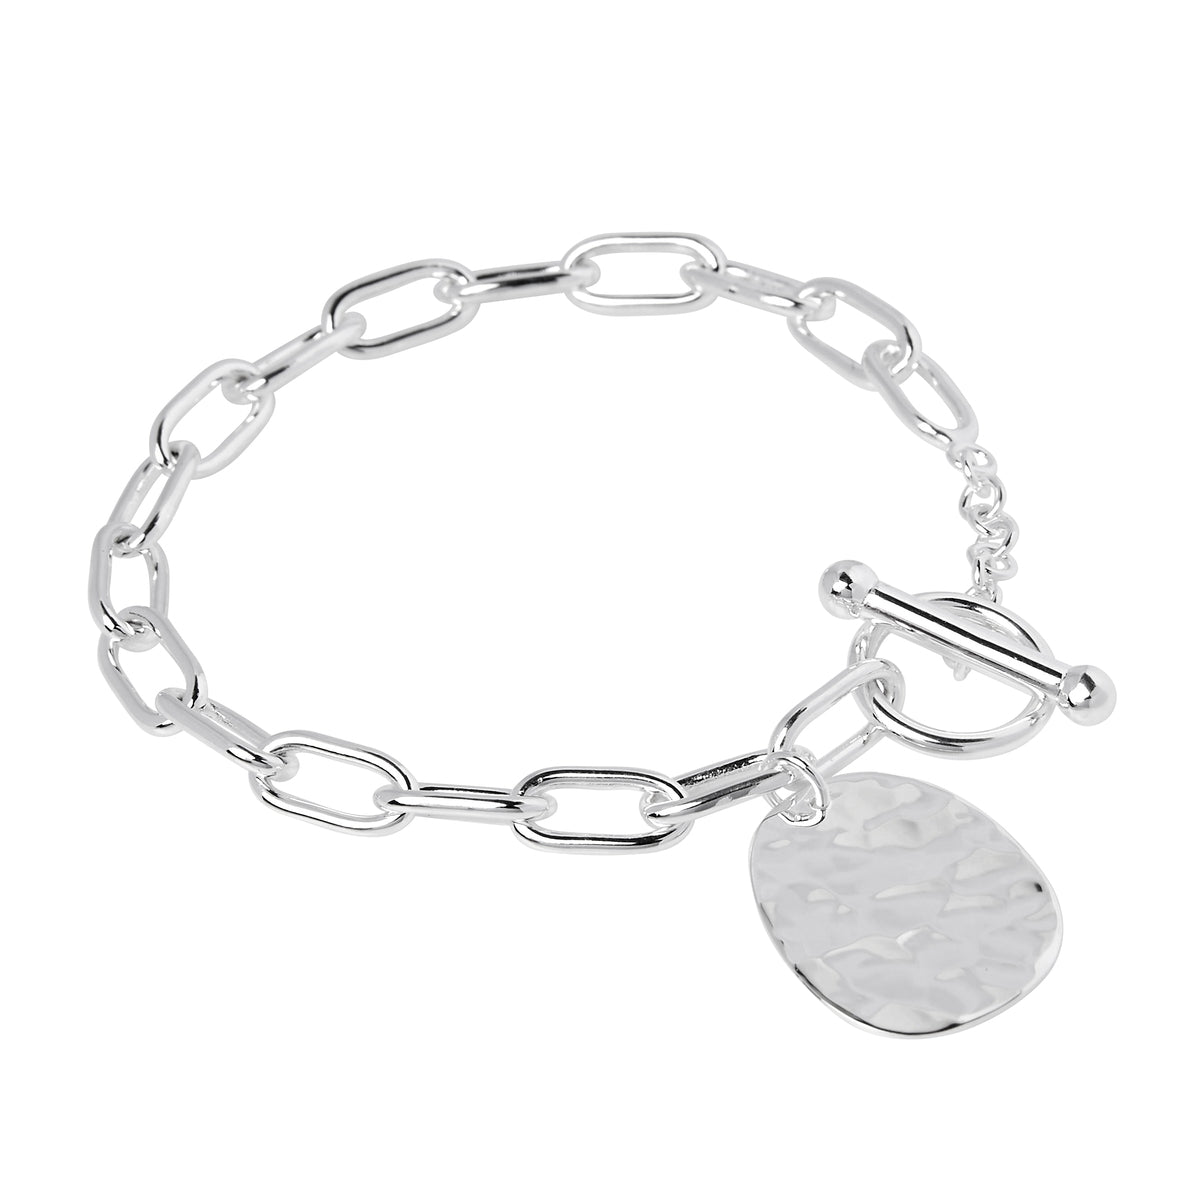 Silver rounded rectangle link chain with beaten disc charm & t-bar clasp, 20cm,